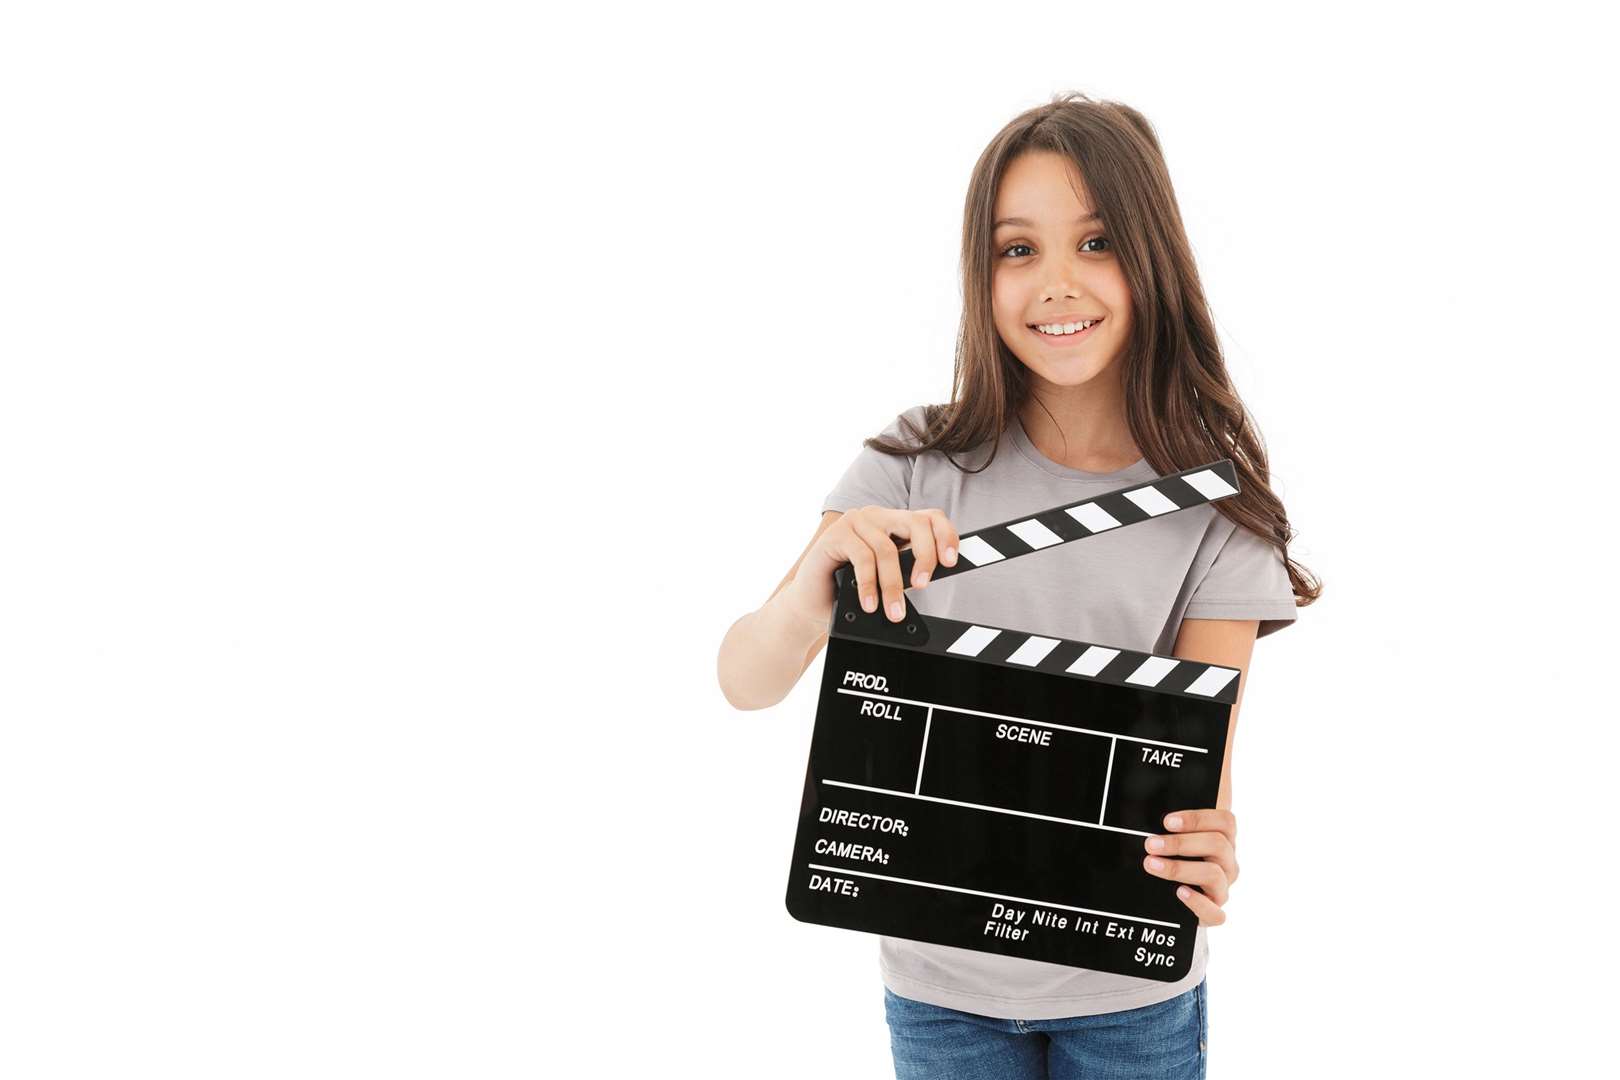 Learn skills to make your own action movie.